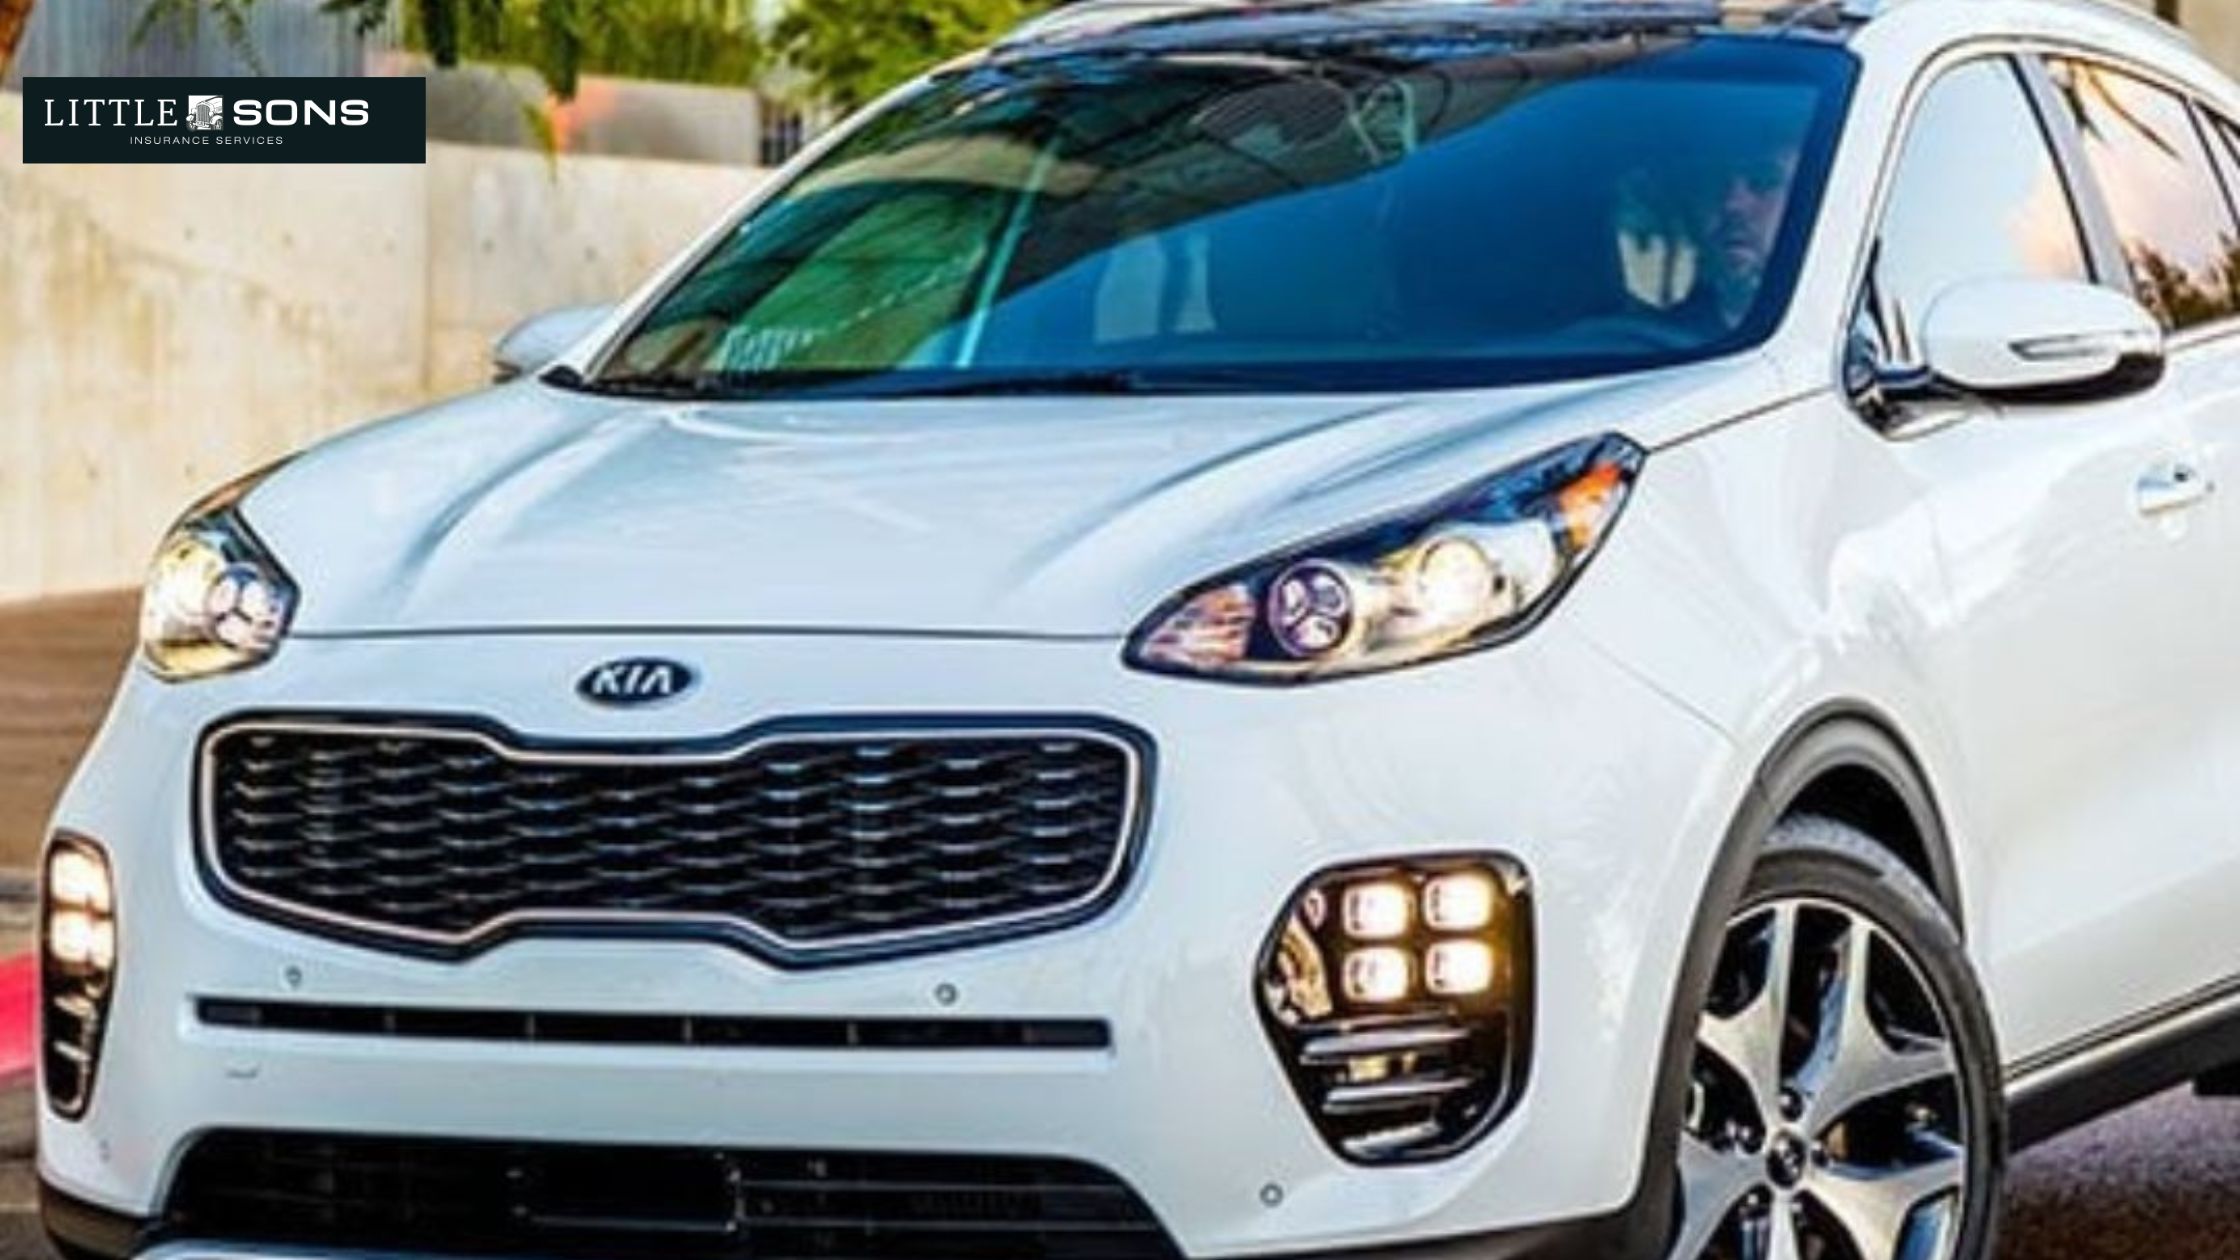 The Rise of Kia and Hyundai Theft: How to Keep Your Car Safe